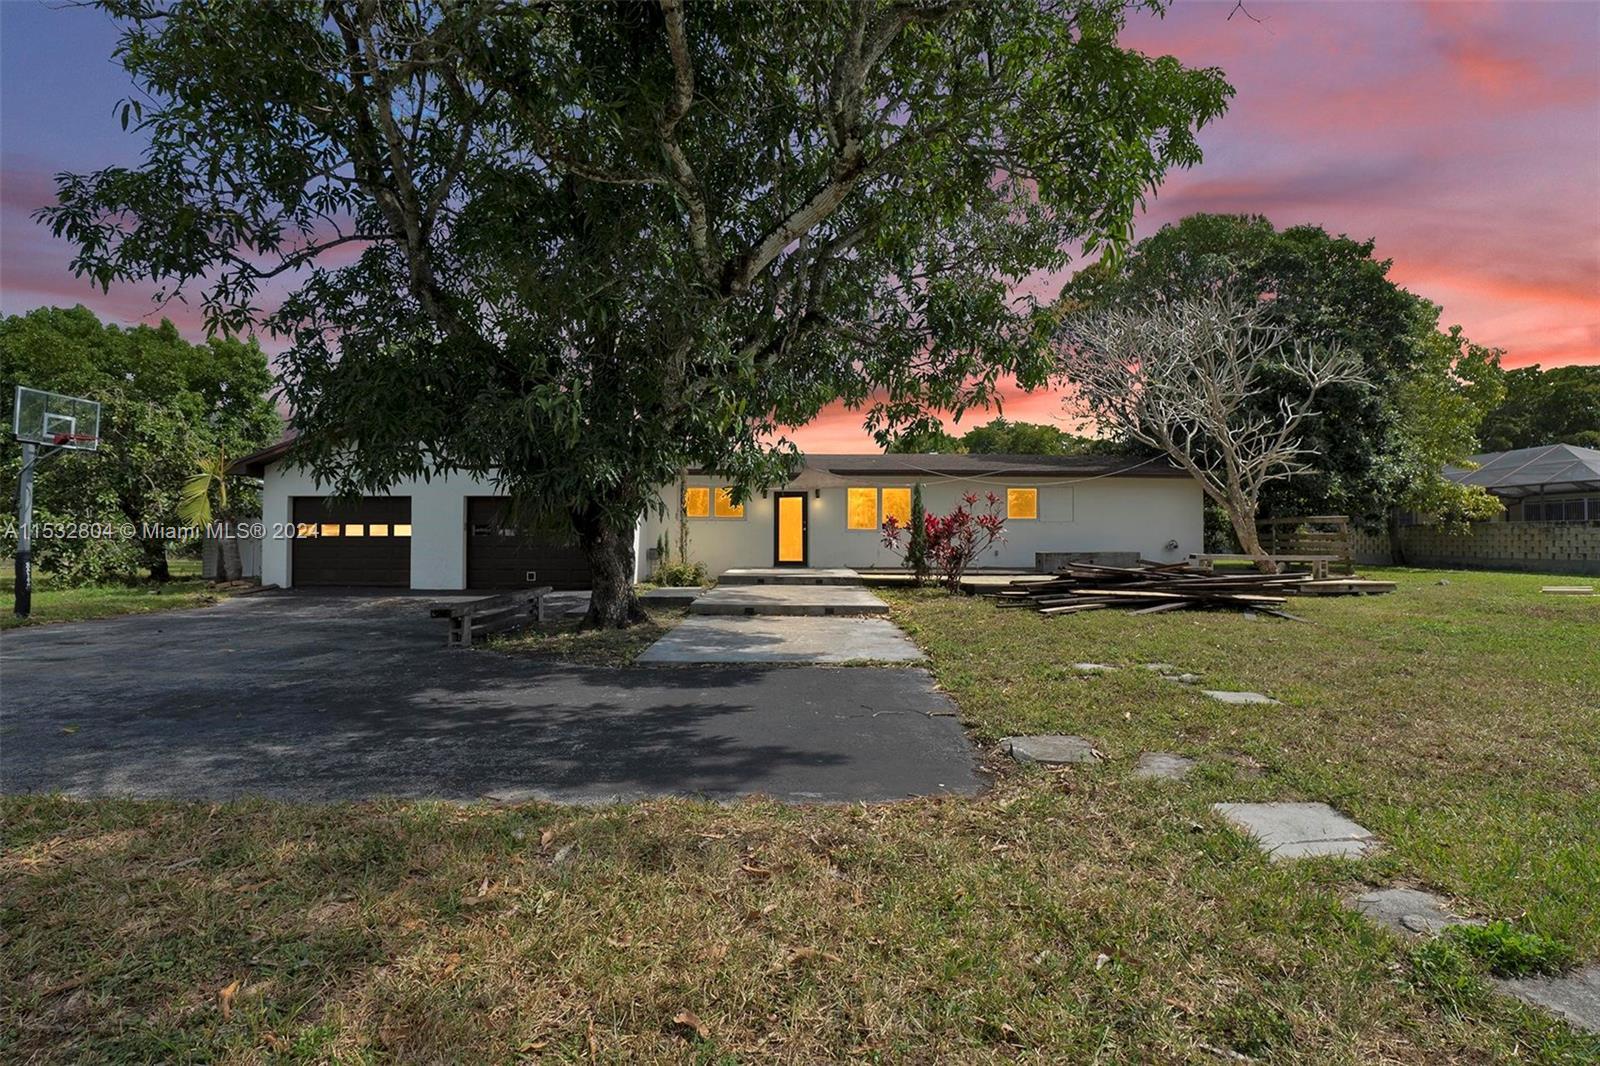 Photo of 14300 NW 77th Ave in Miami Lakes, FL